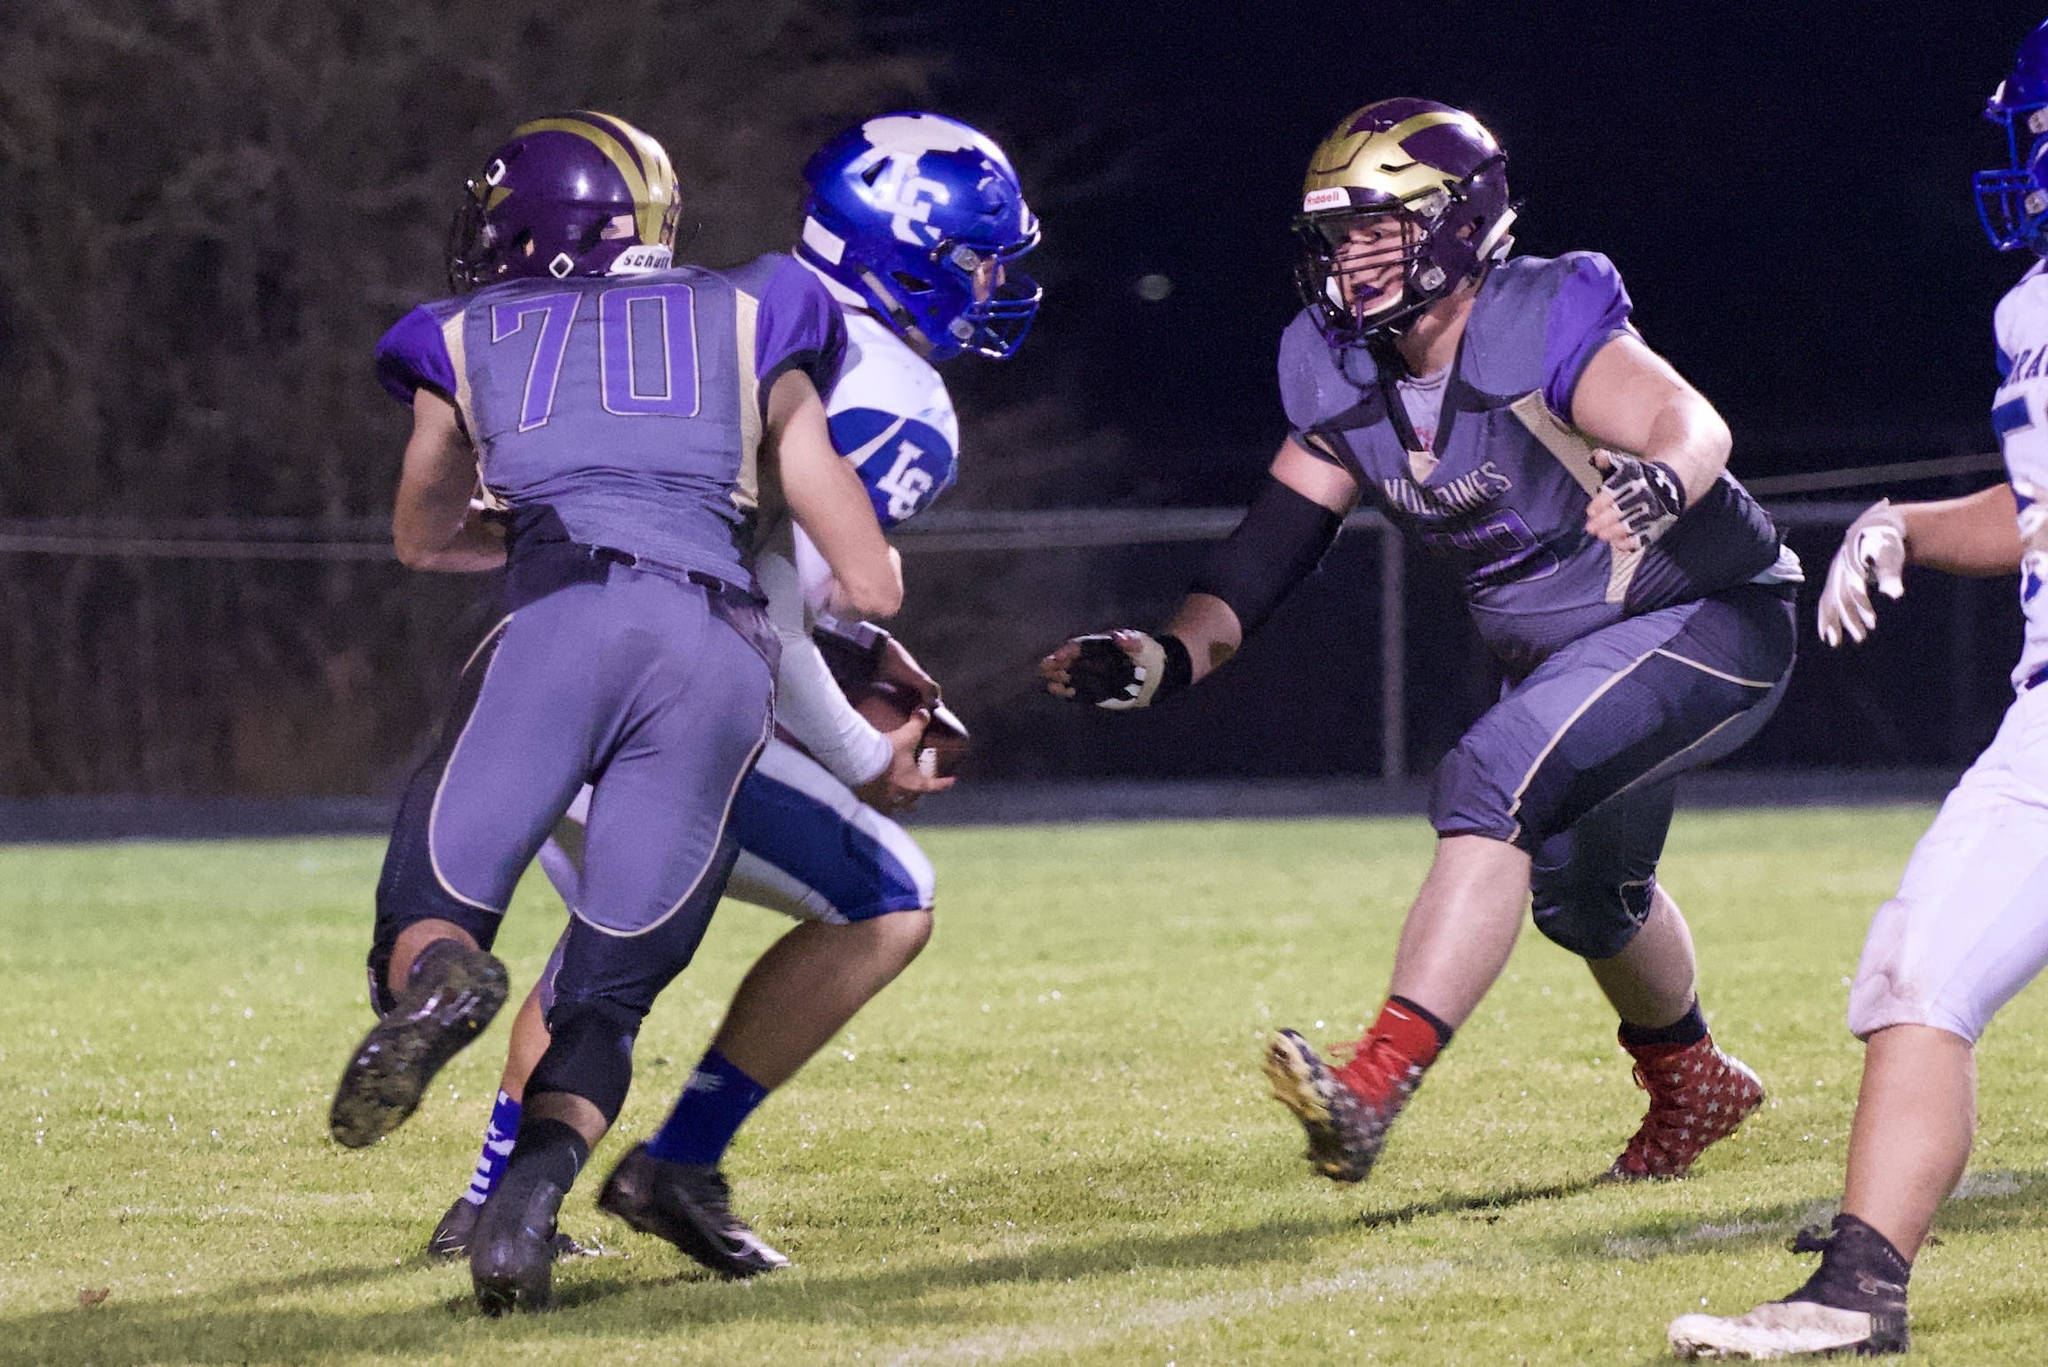 Will Leeming, No. 70, and Weston Swirtz, No. 68, put the stop on the Braves ball carrier. (John Stimpson/Contributed photo.)